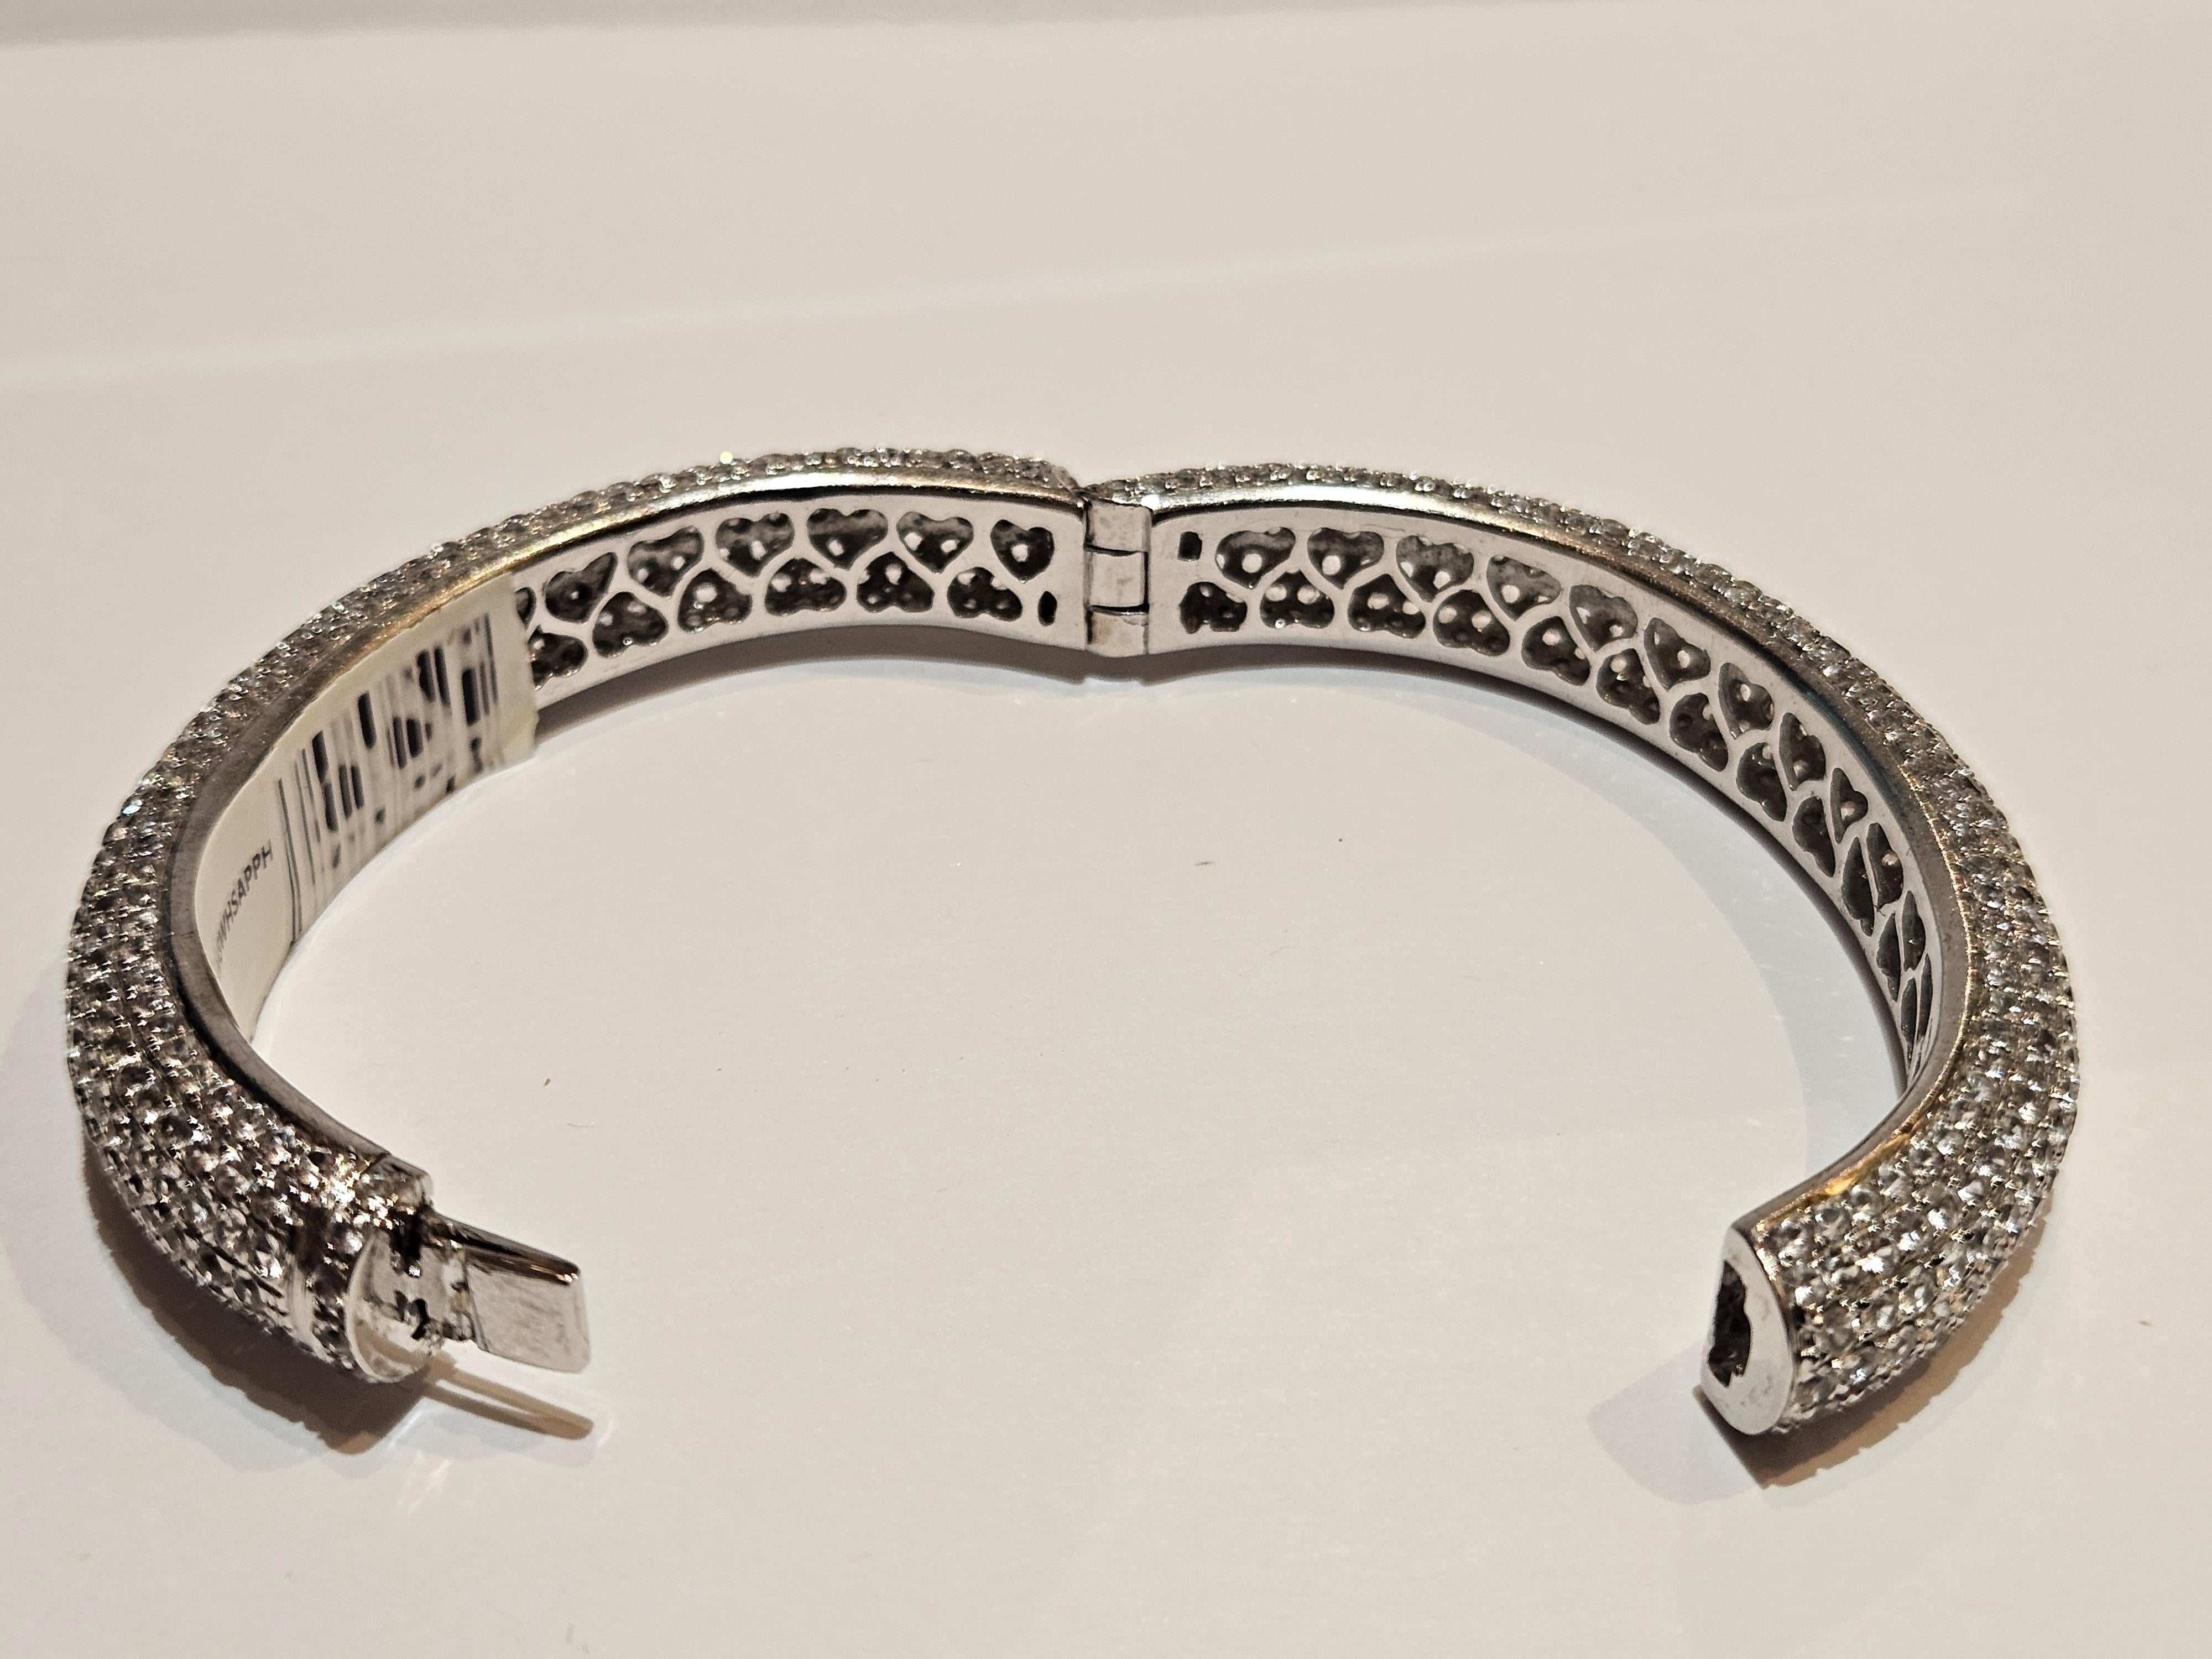 NWT $7, 200 Fancy Glittering 25CT White Sapphire Bracelet Bangle Cuff In New Condition For Sale In New York, NY